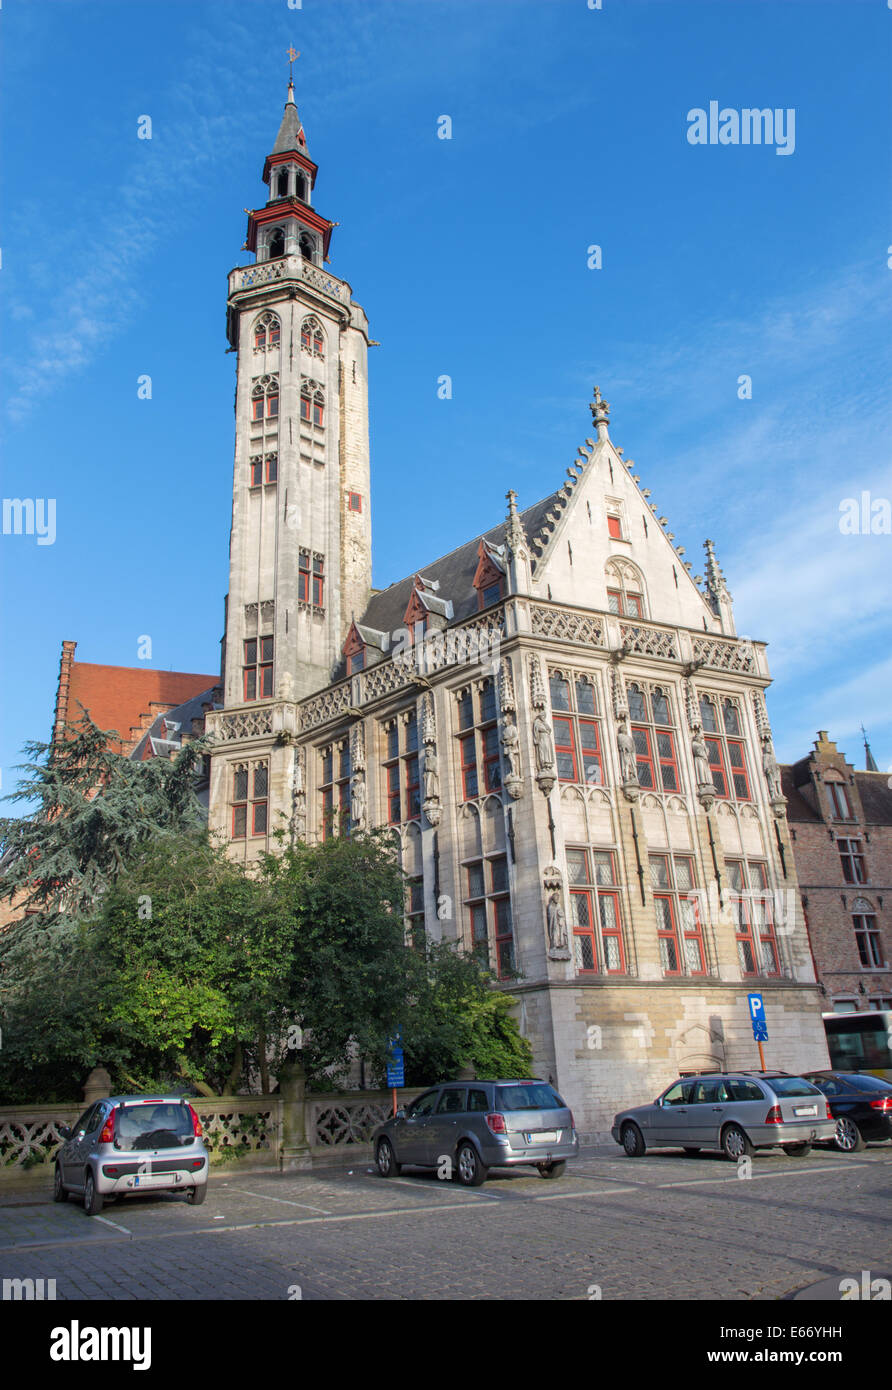 Brugge - The Burghers lodge building in morning light on Jan Van Dyck square. Stock Photo